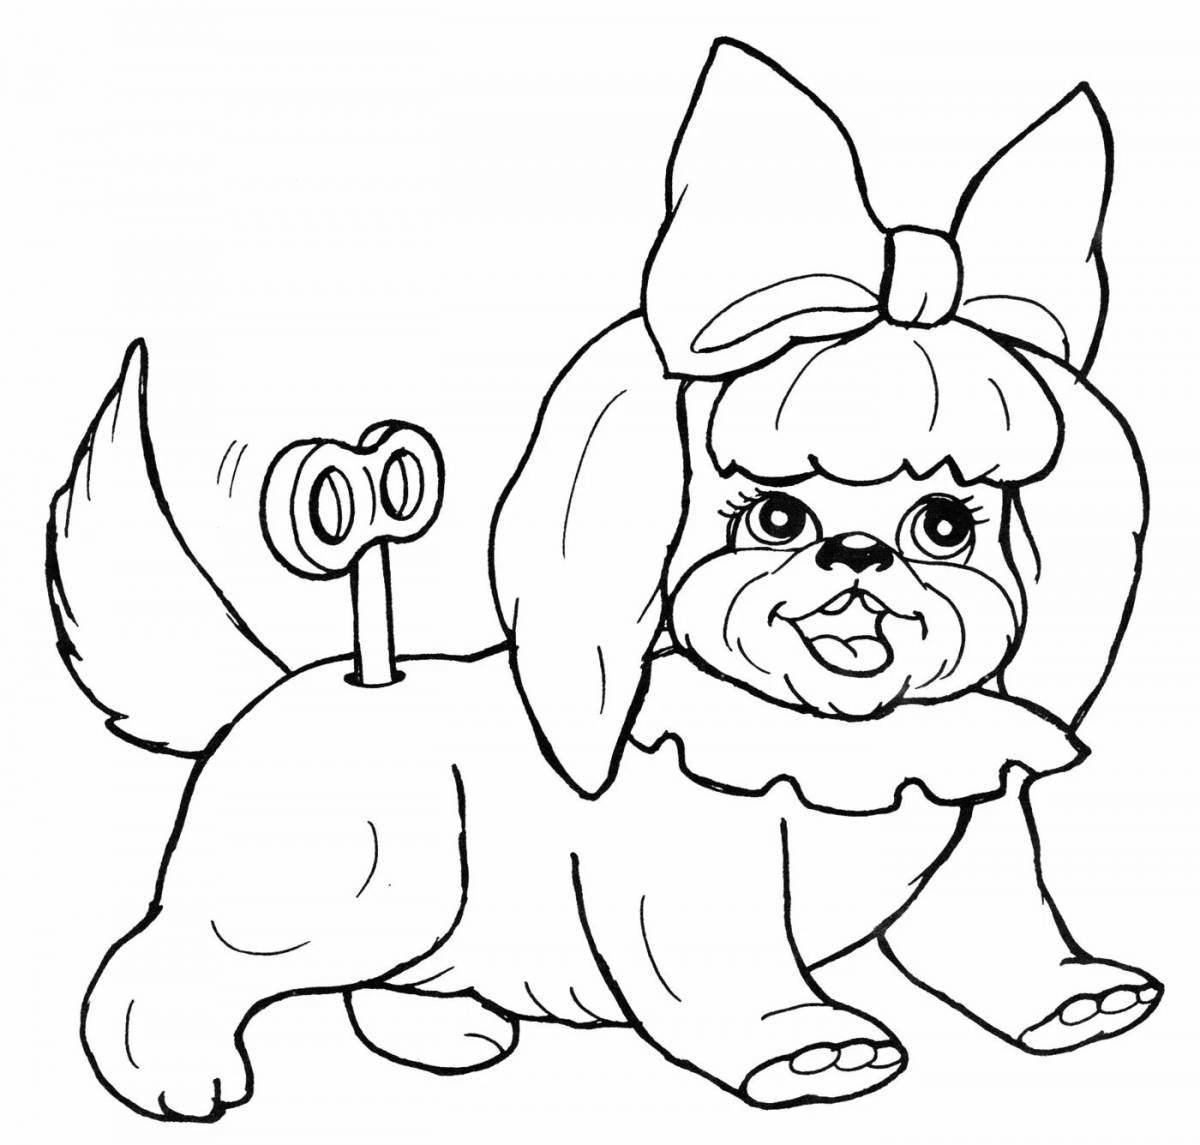 Dog with bow #19